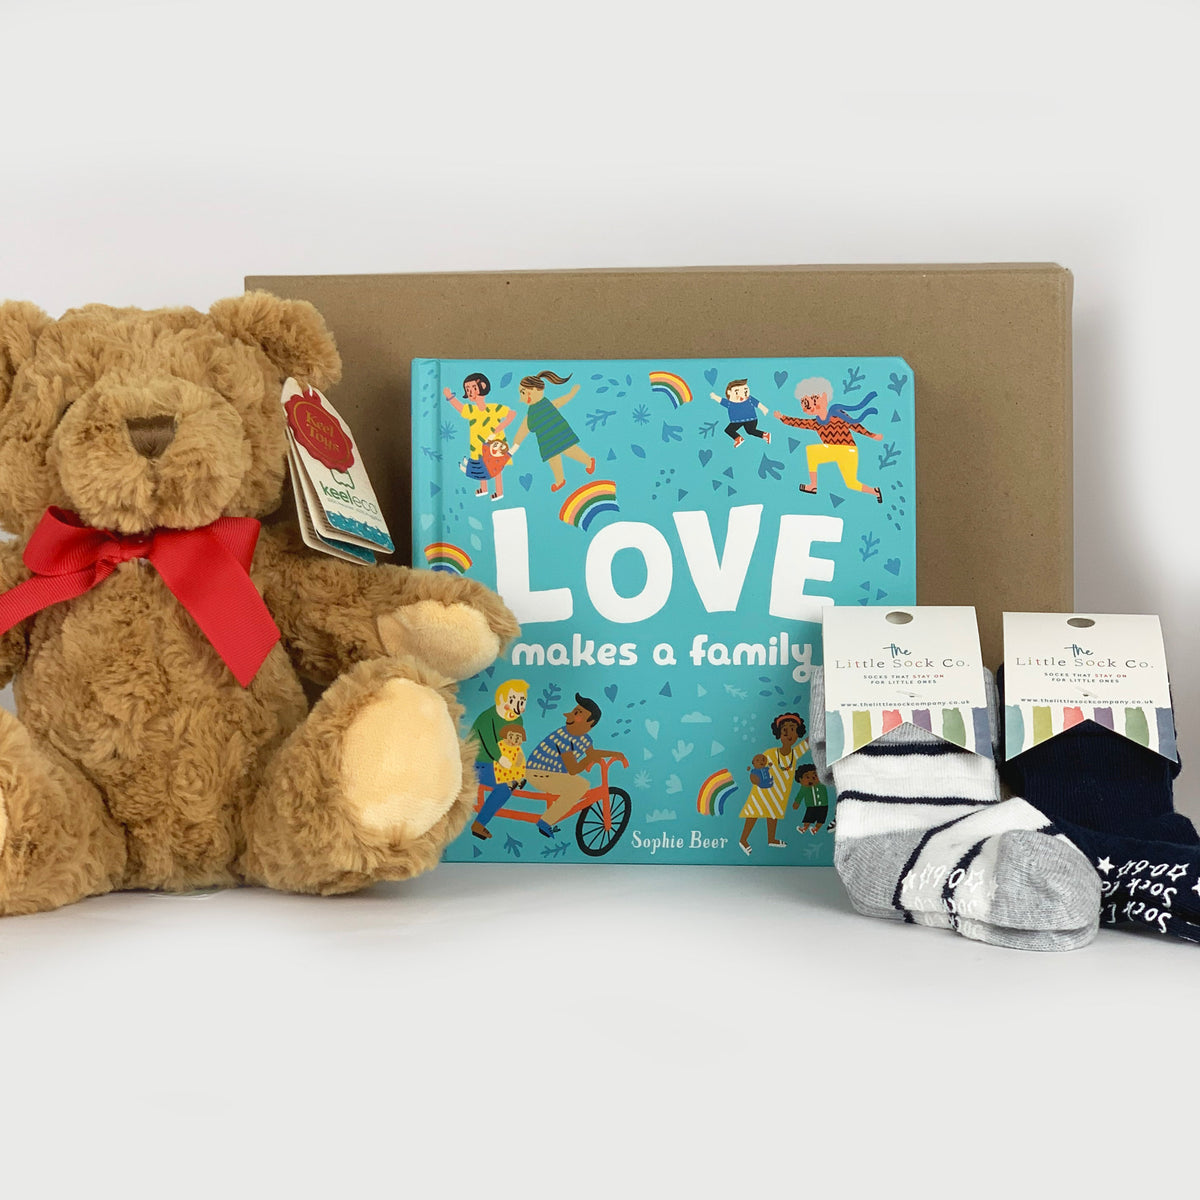 Love Makes a Family Luxury Gift Set for Babies and Toddlers